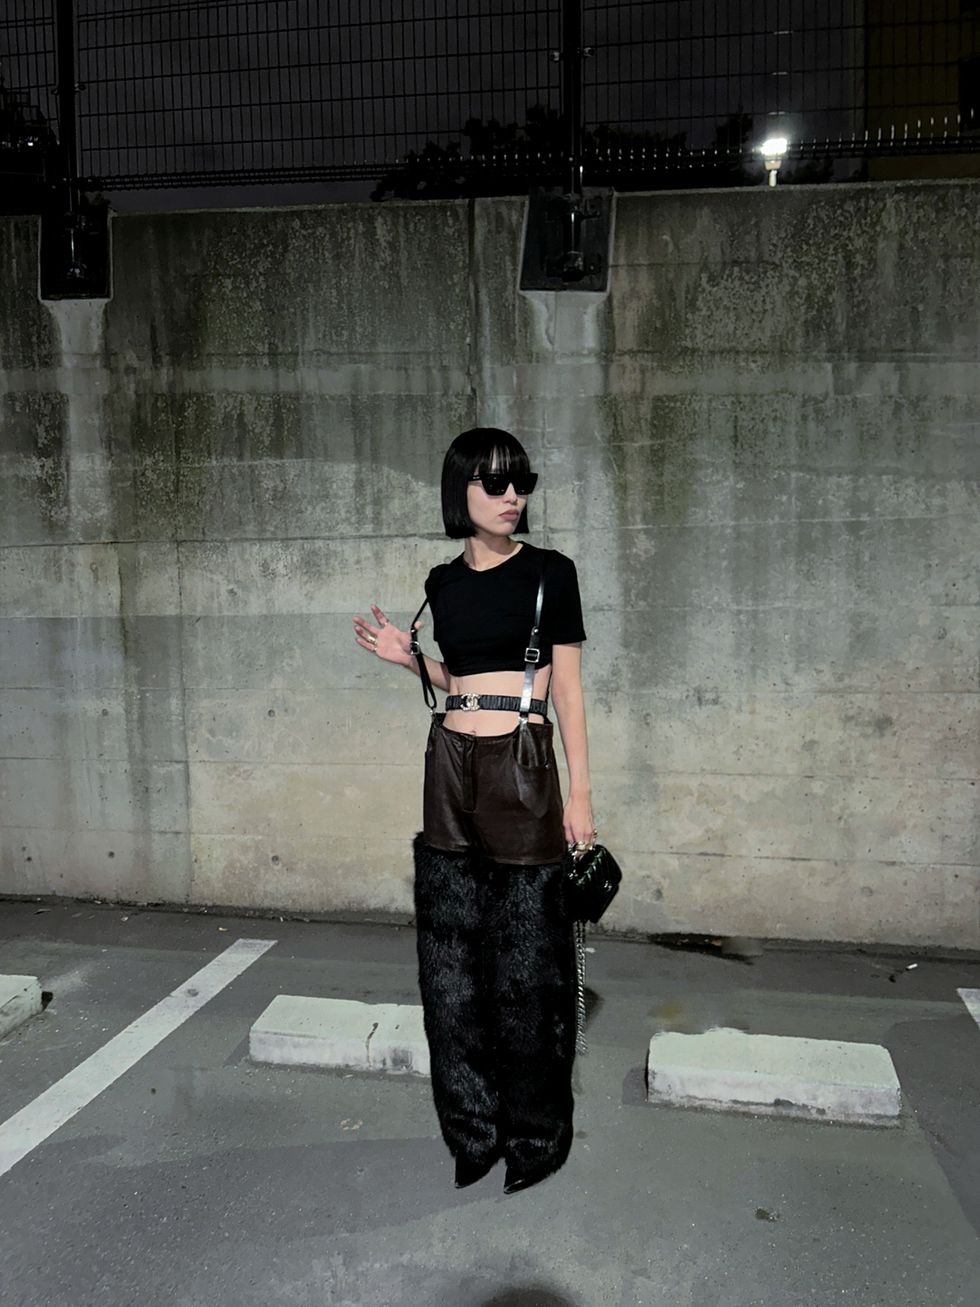 a person wearing a black dress and sunglasses standing in a parking lot